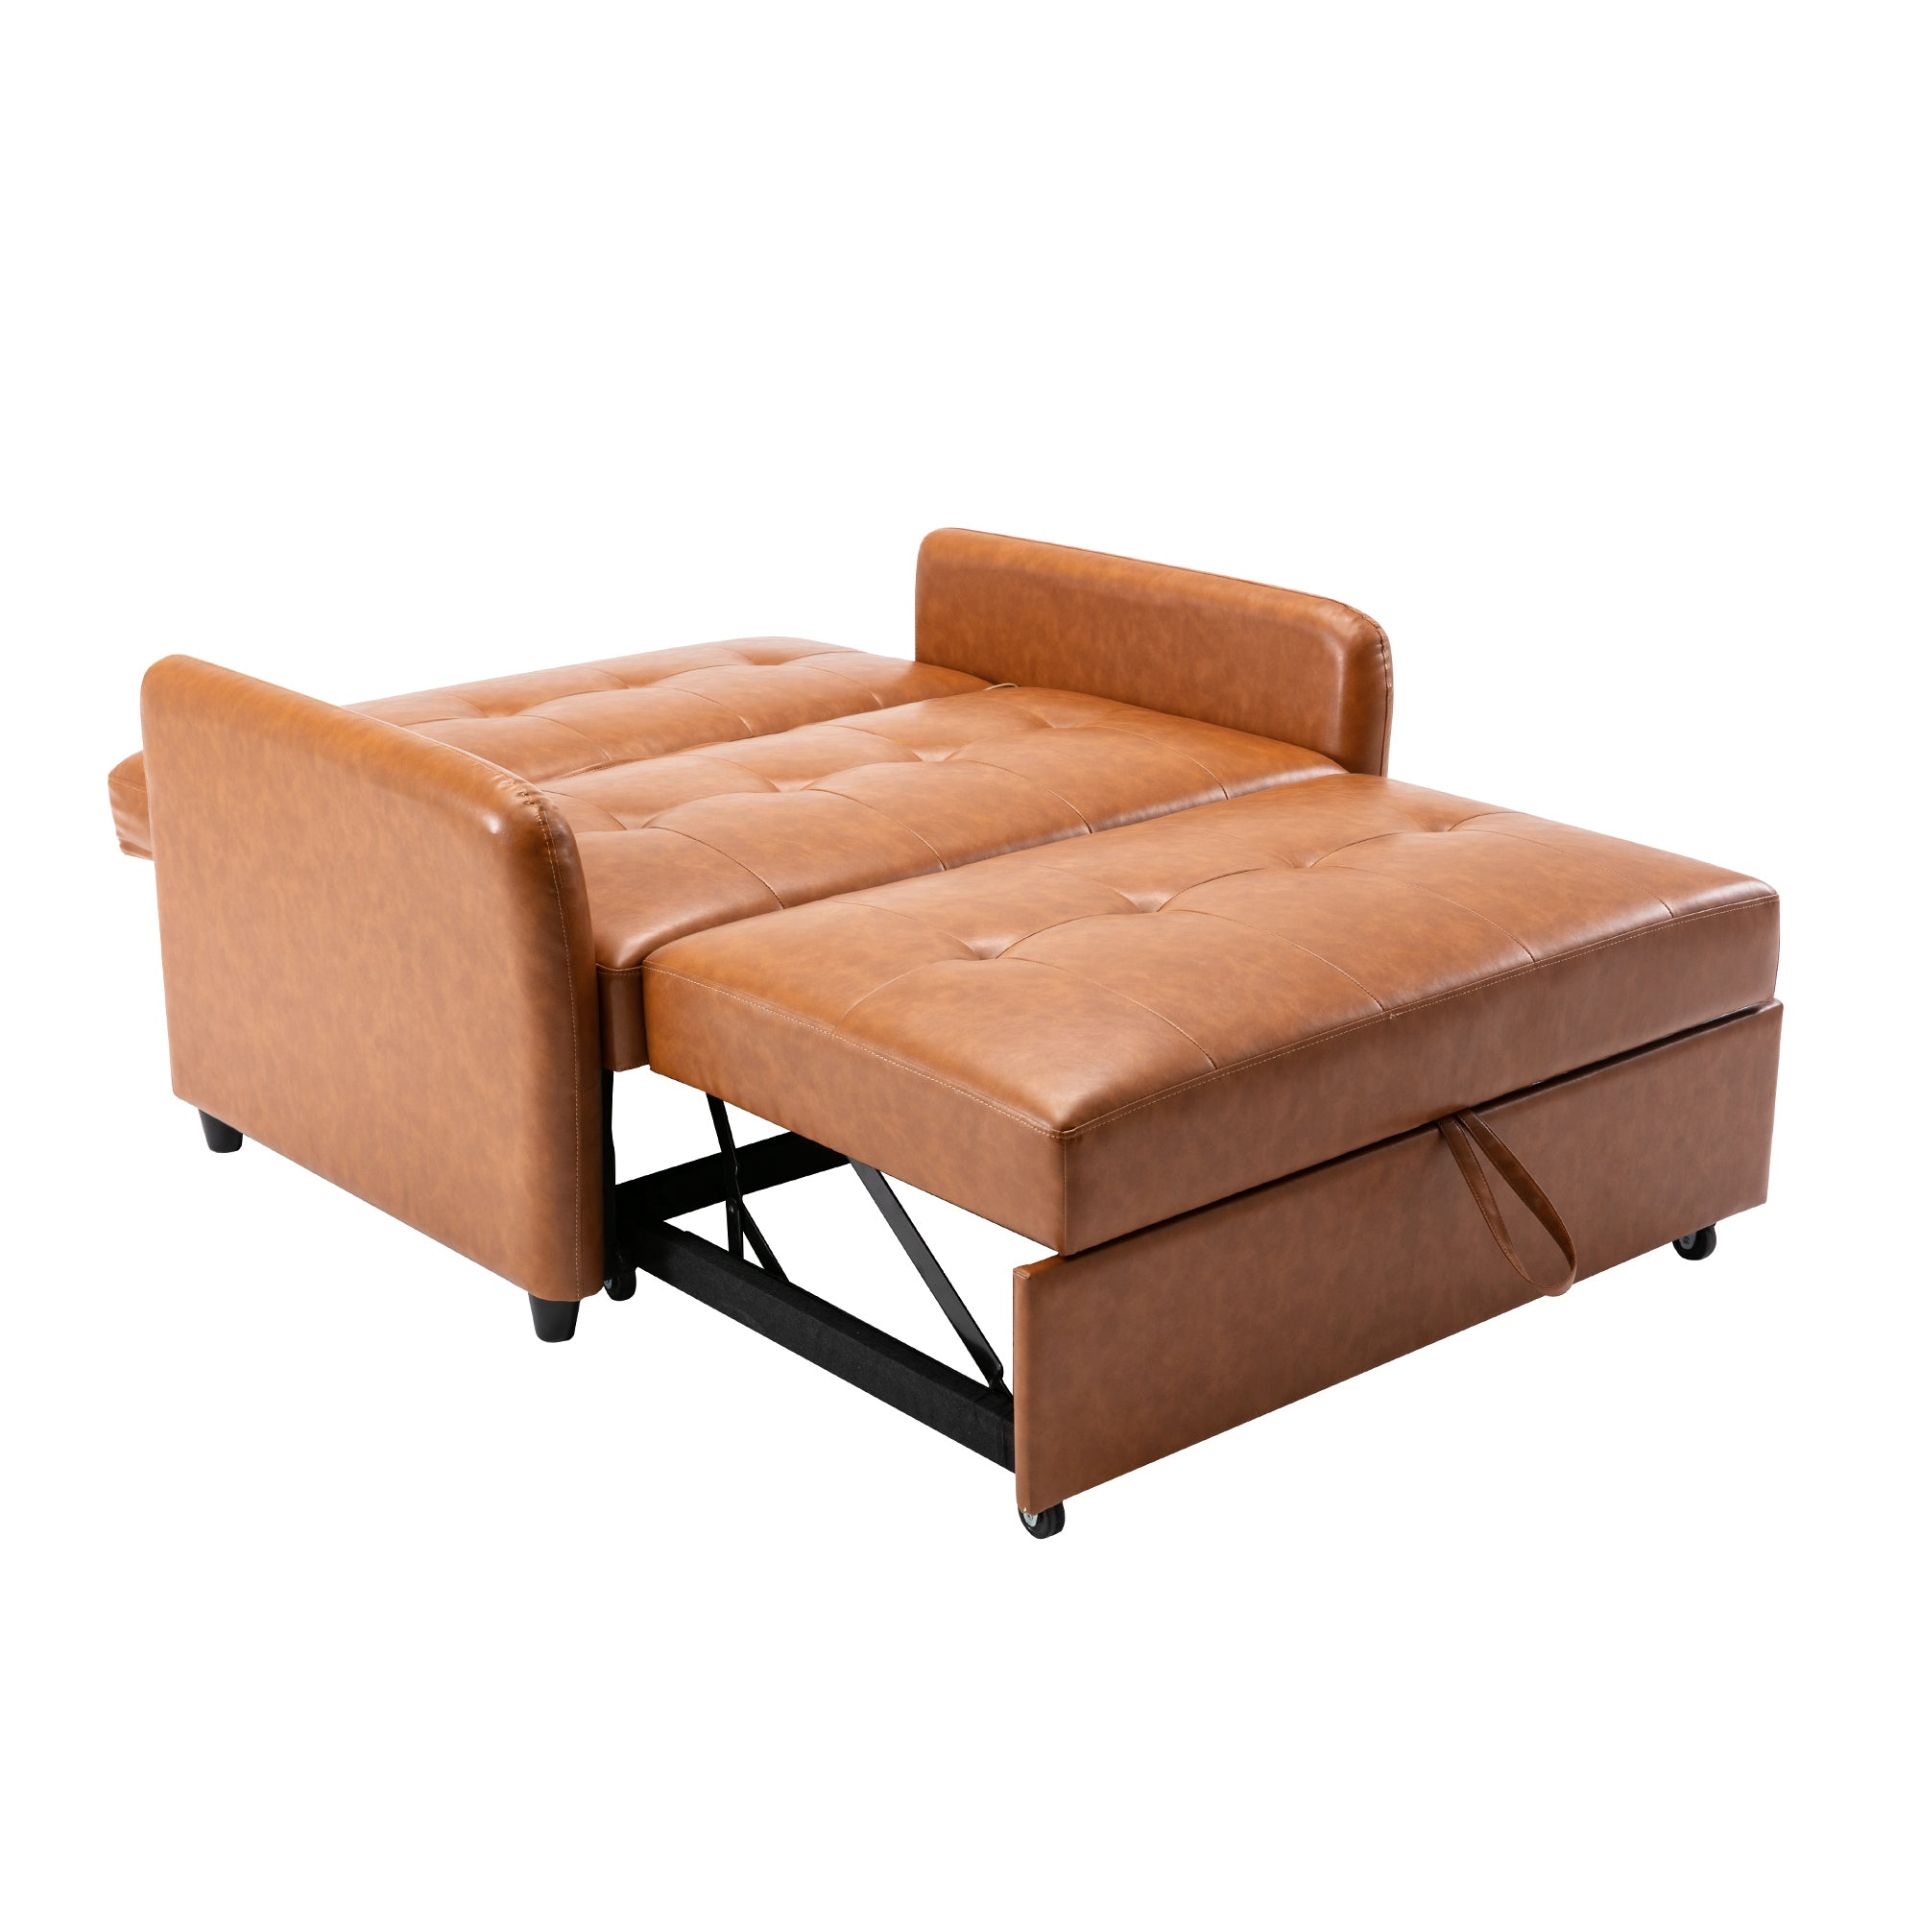 Brown - Smart Rest Convertible Armchair Sofa Bed With Dual USB Ports (51.5")